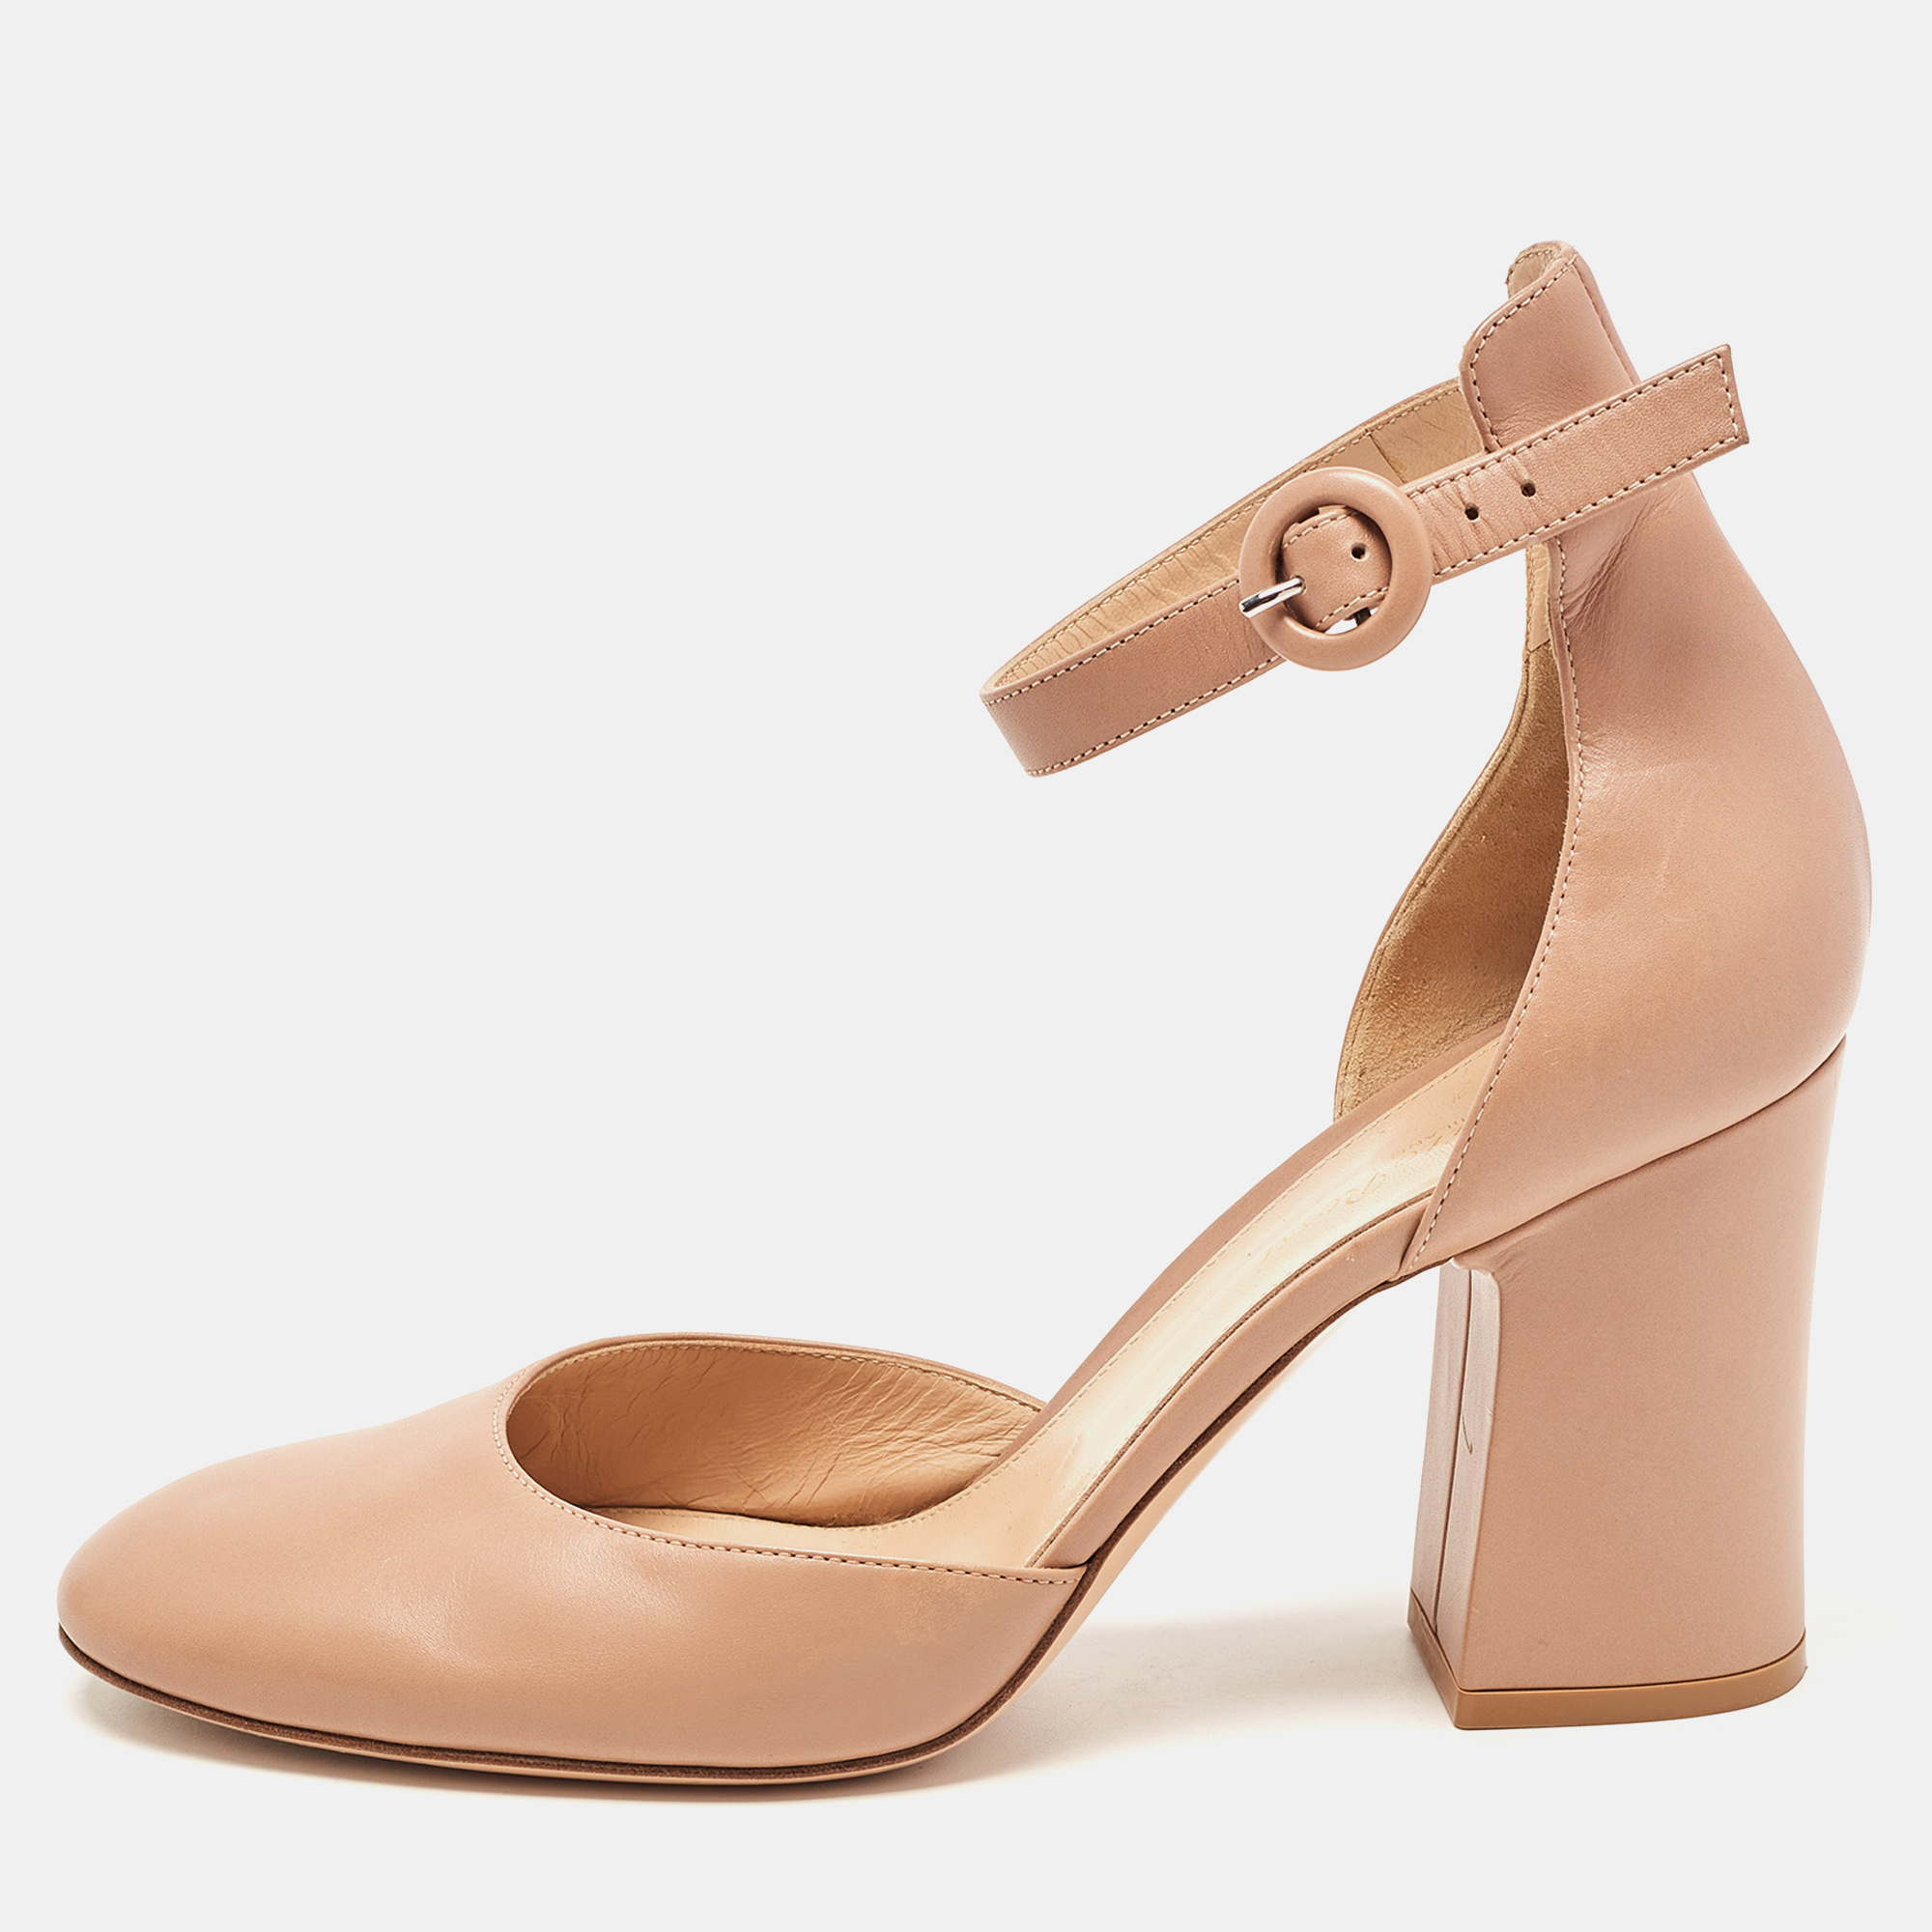 Gianvito rossi beige leather ankle strap block heel pumps size 40